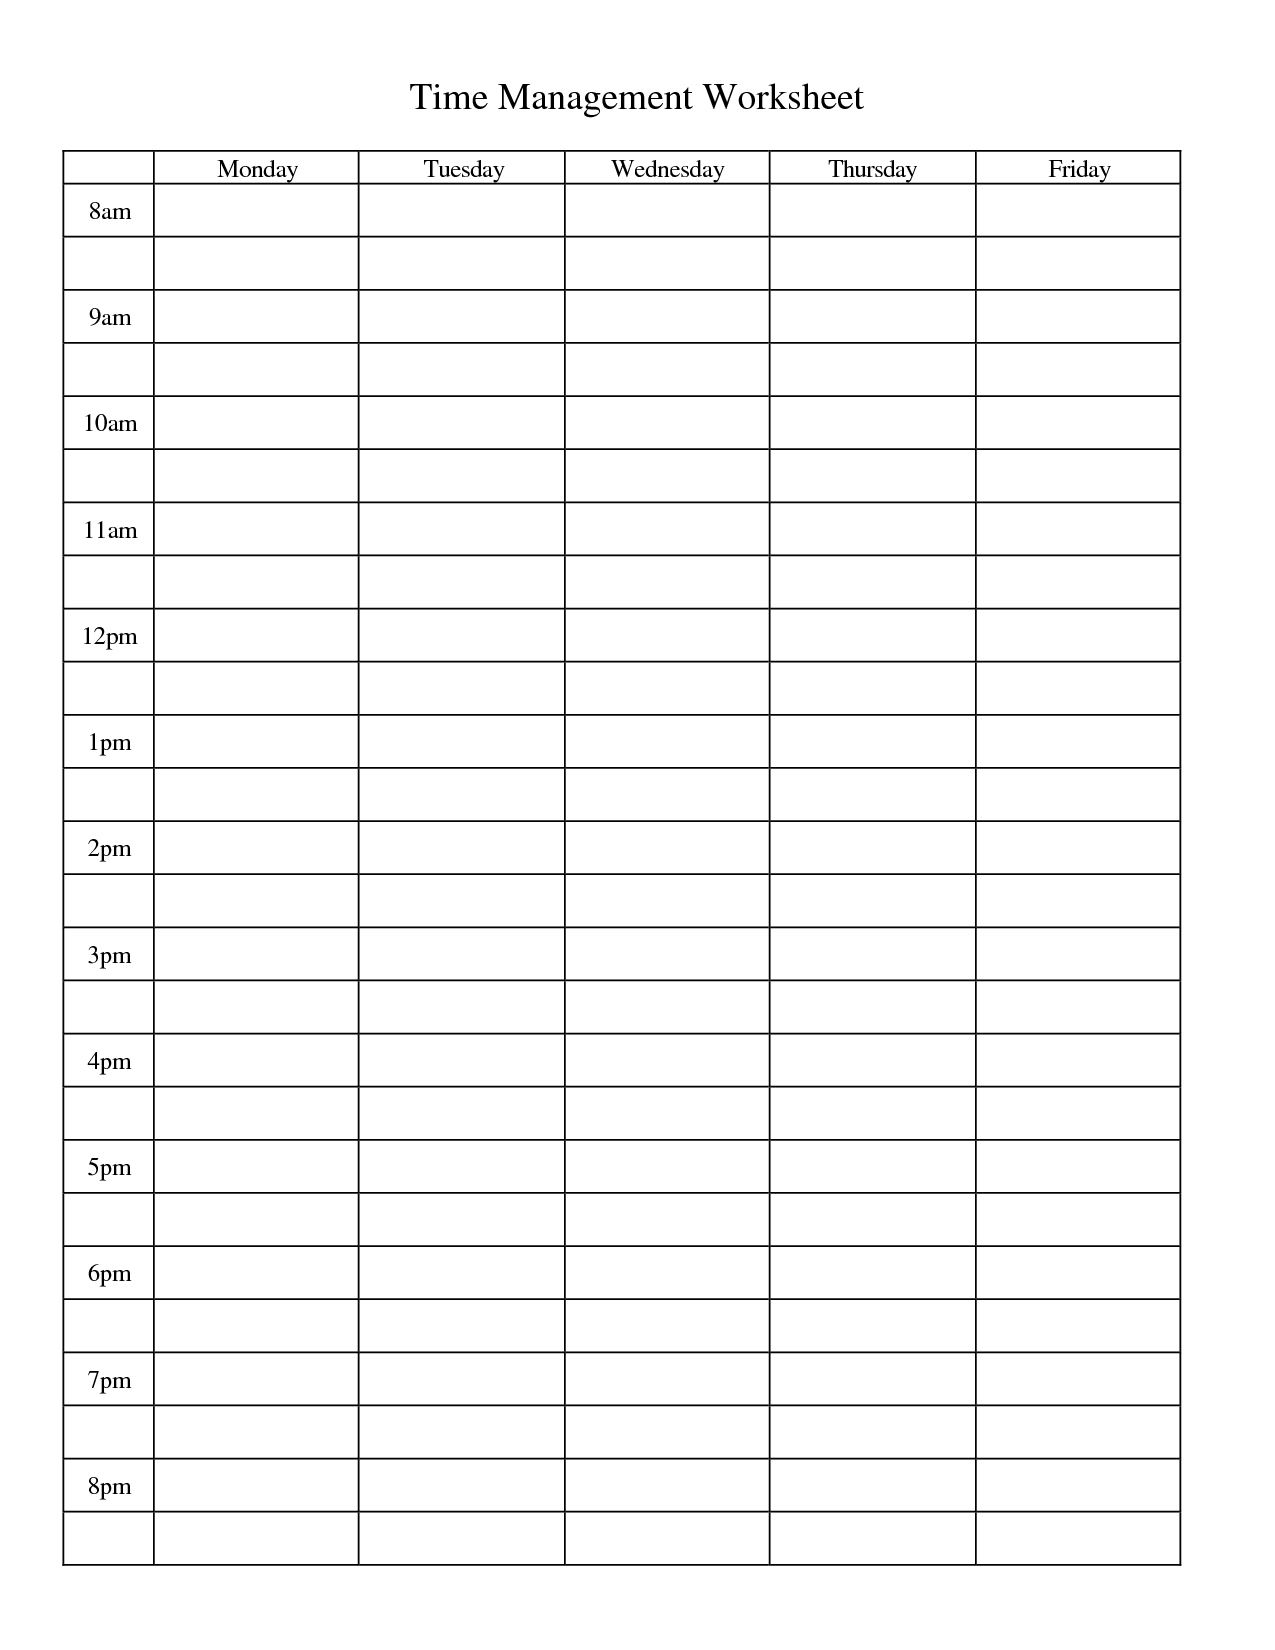 Time Management Worksheet Pdf – Google Search | Organization In Time Management Sheets Template